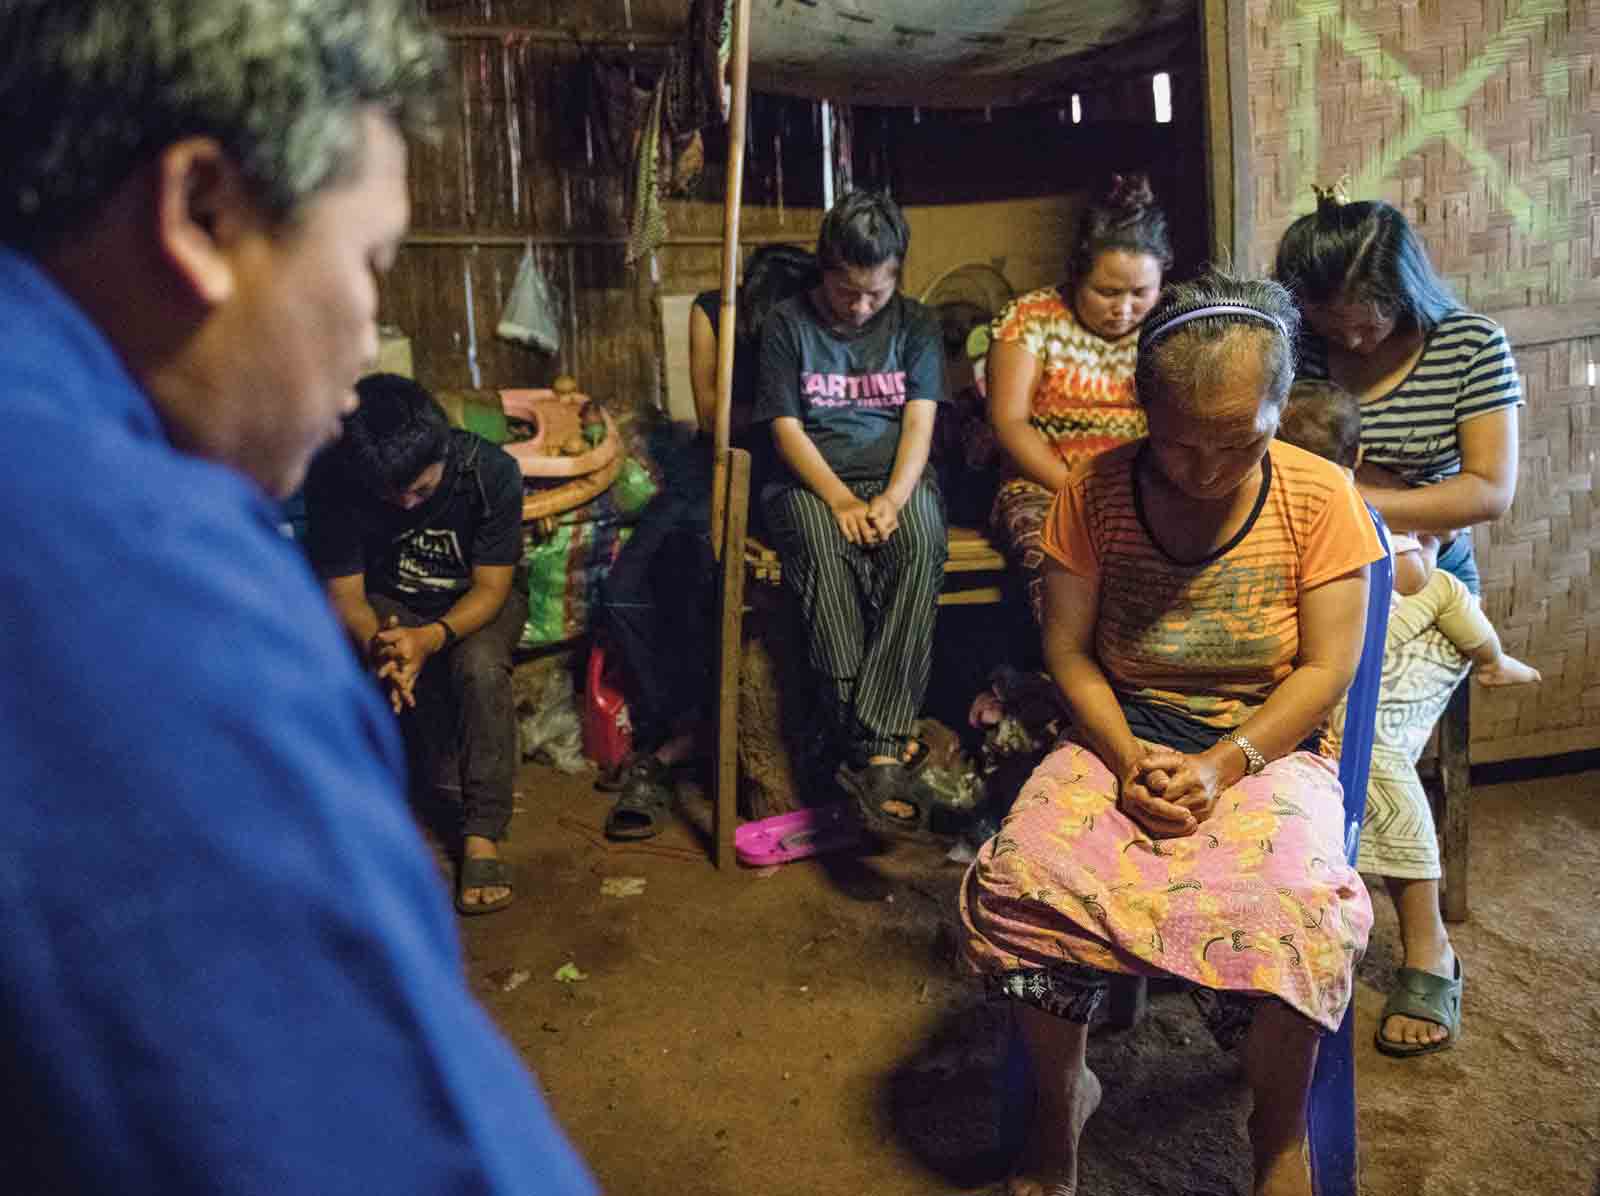 A pastor prays with members of a Southeast Asian tribal group at home.